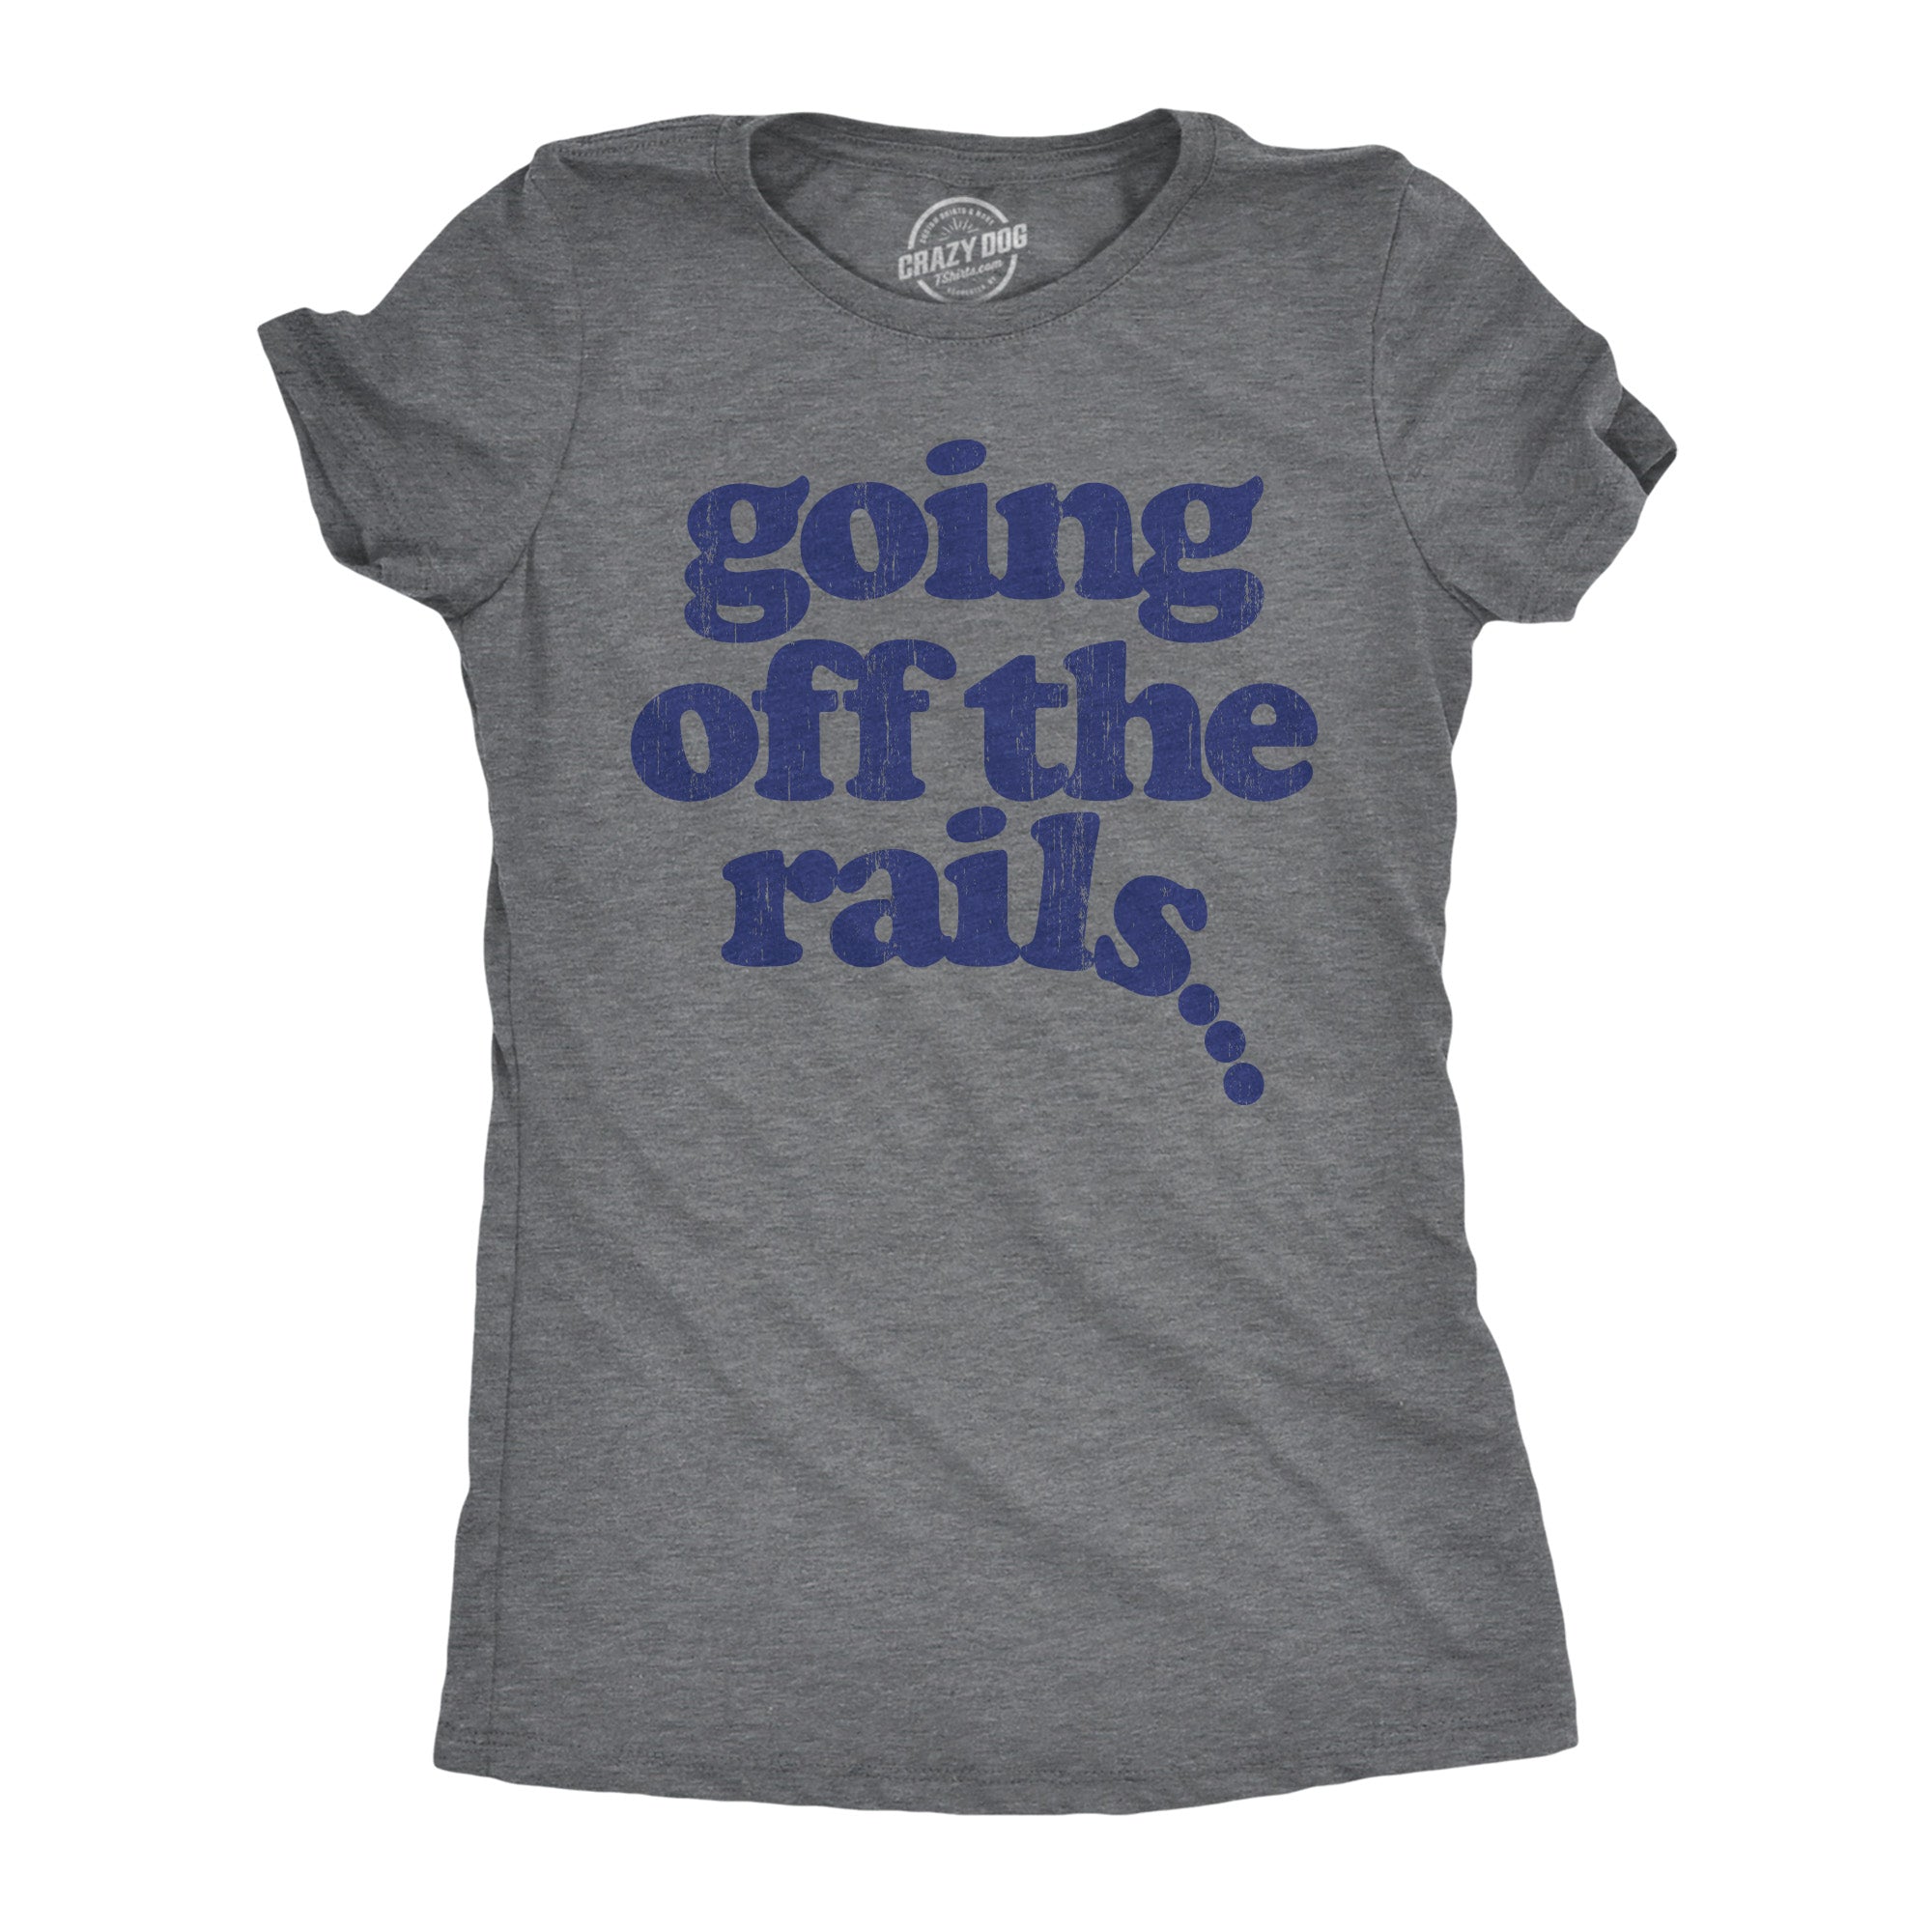 Funny Dark Heather Grey - Off The Rails Going Off The Rails Womens T Shirt Nerdy Sarcastic Tee